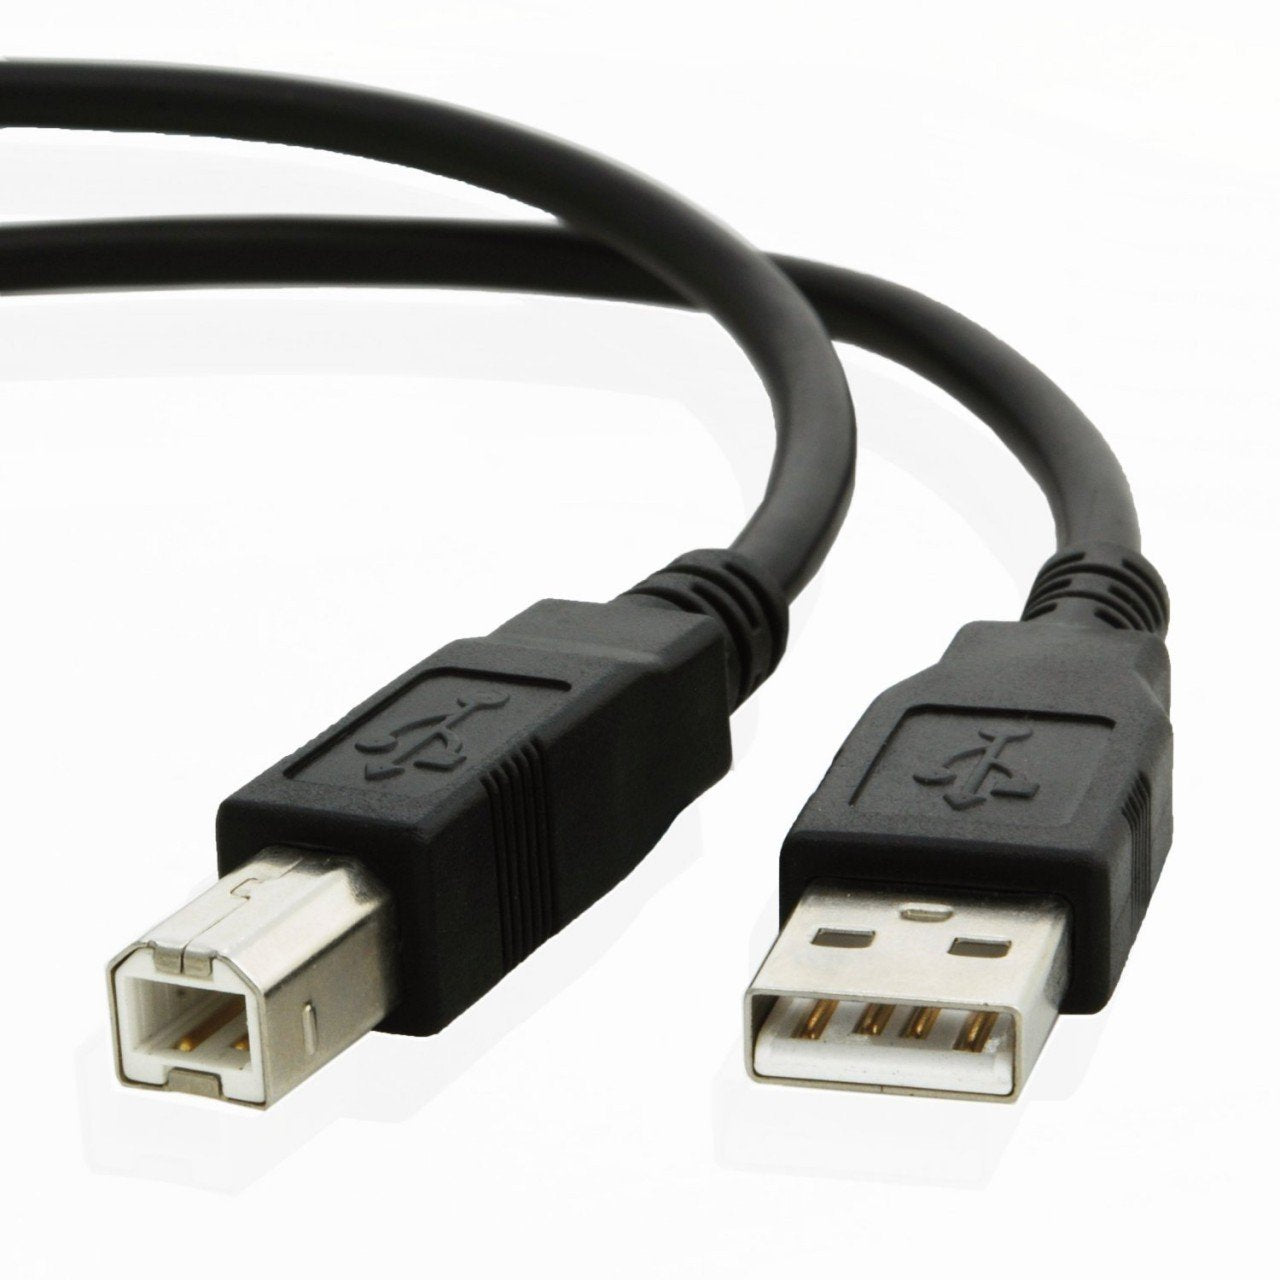 USB cable for Epson STYLUS PRO 4900